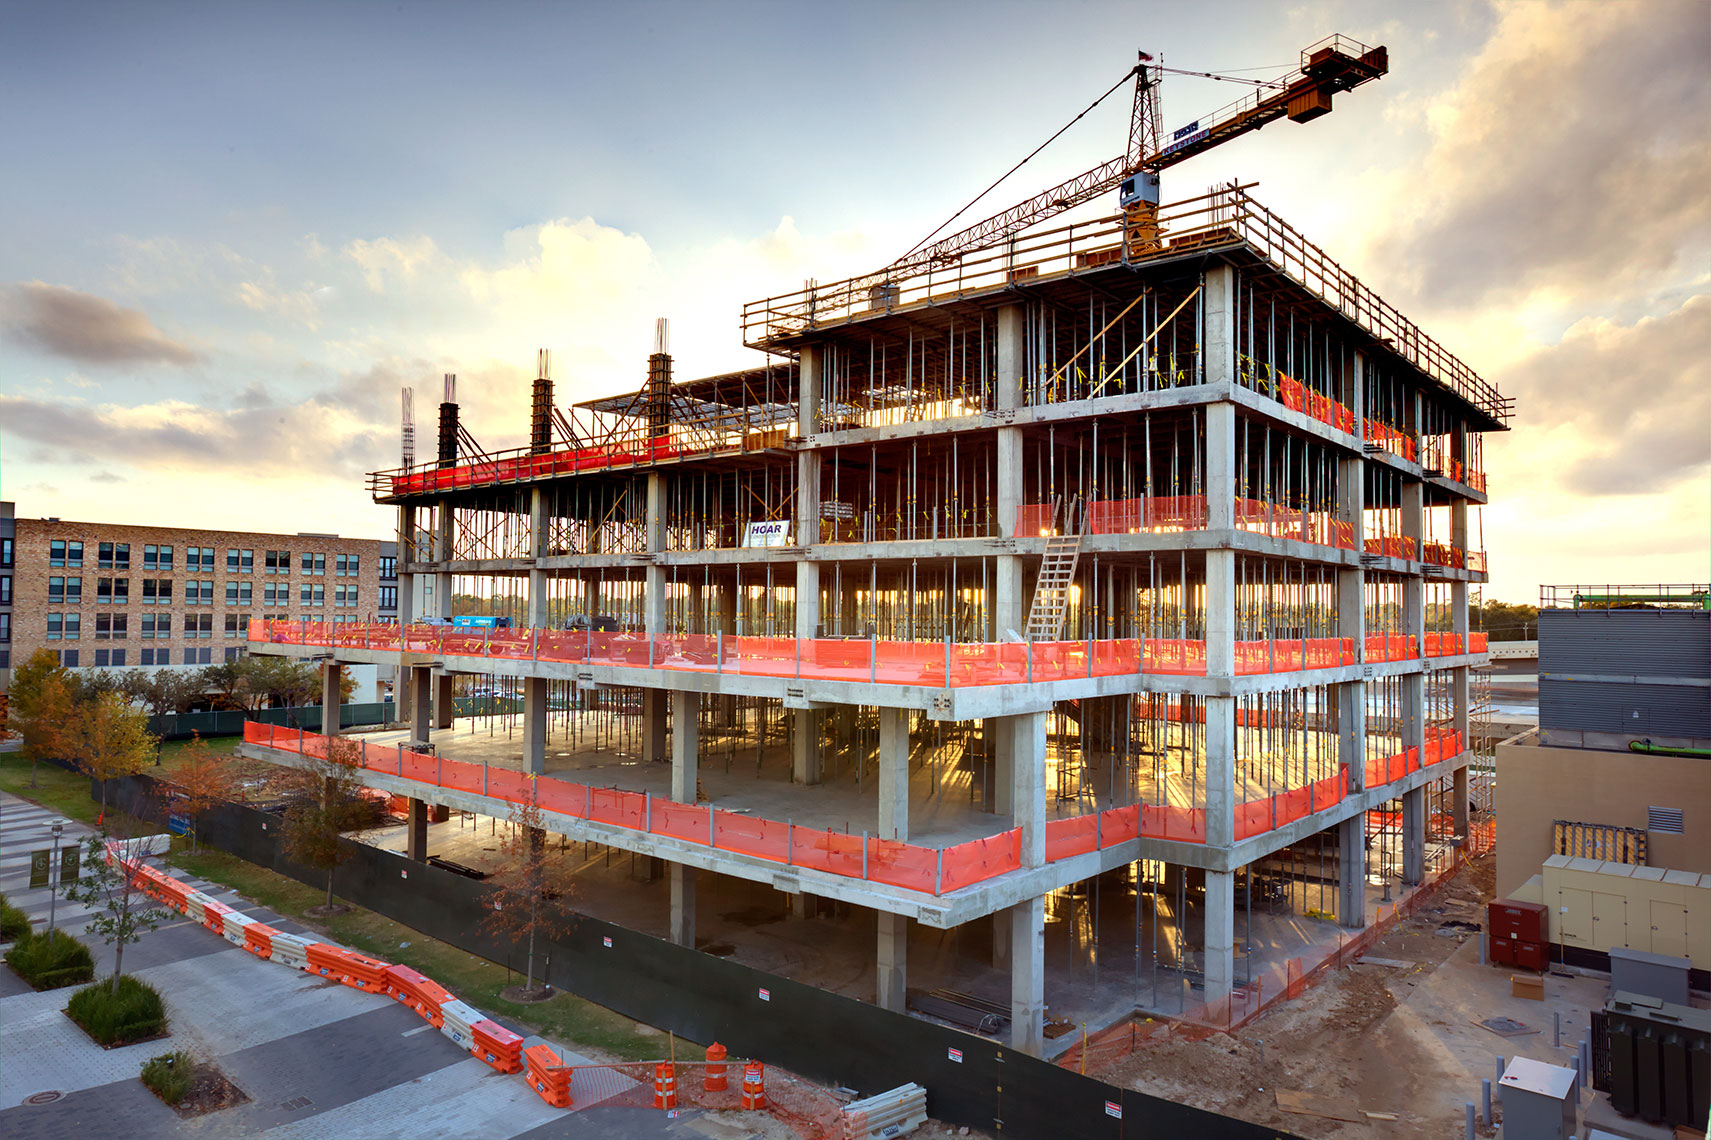 Construction site at CityCentre in Houston Texas by the Best Construction Photographer